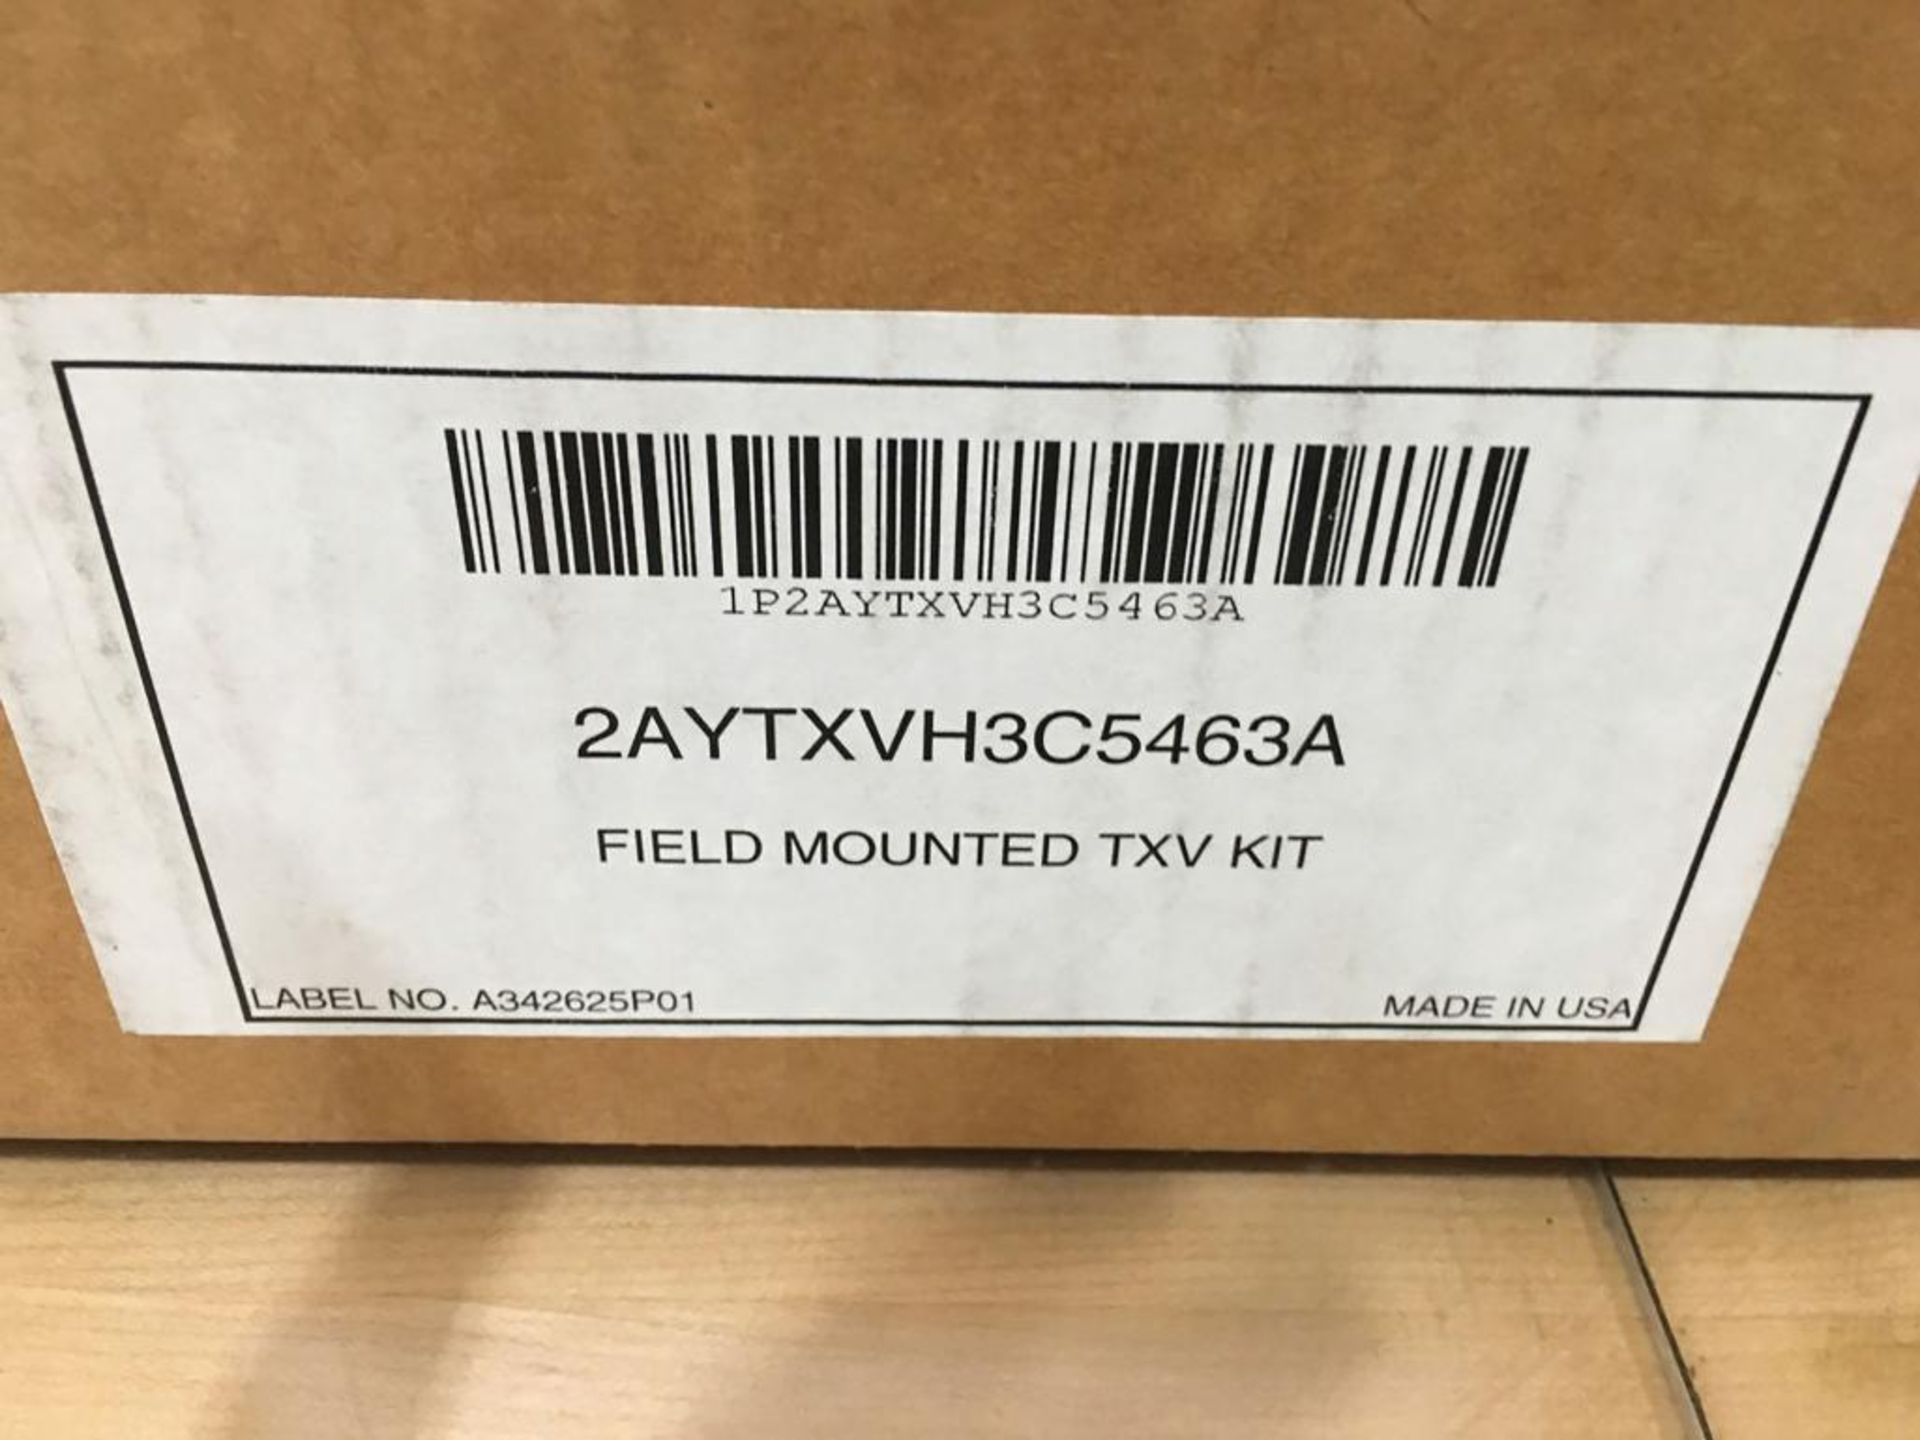 (100) American Standard 5-Ton Field Mounted TXV Kits For R-22, Model 2AYTXVH3C5463A, This Kit Can Be - Image 5 of 5